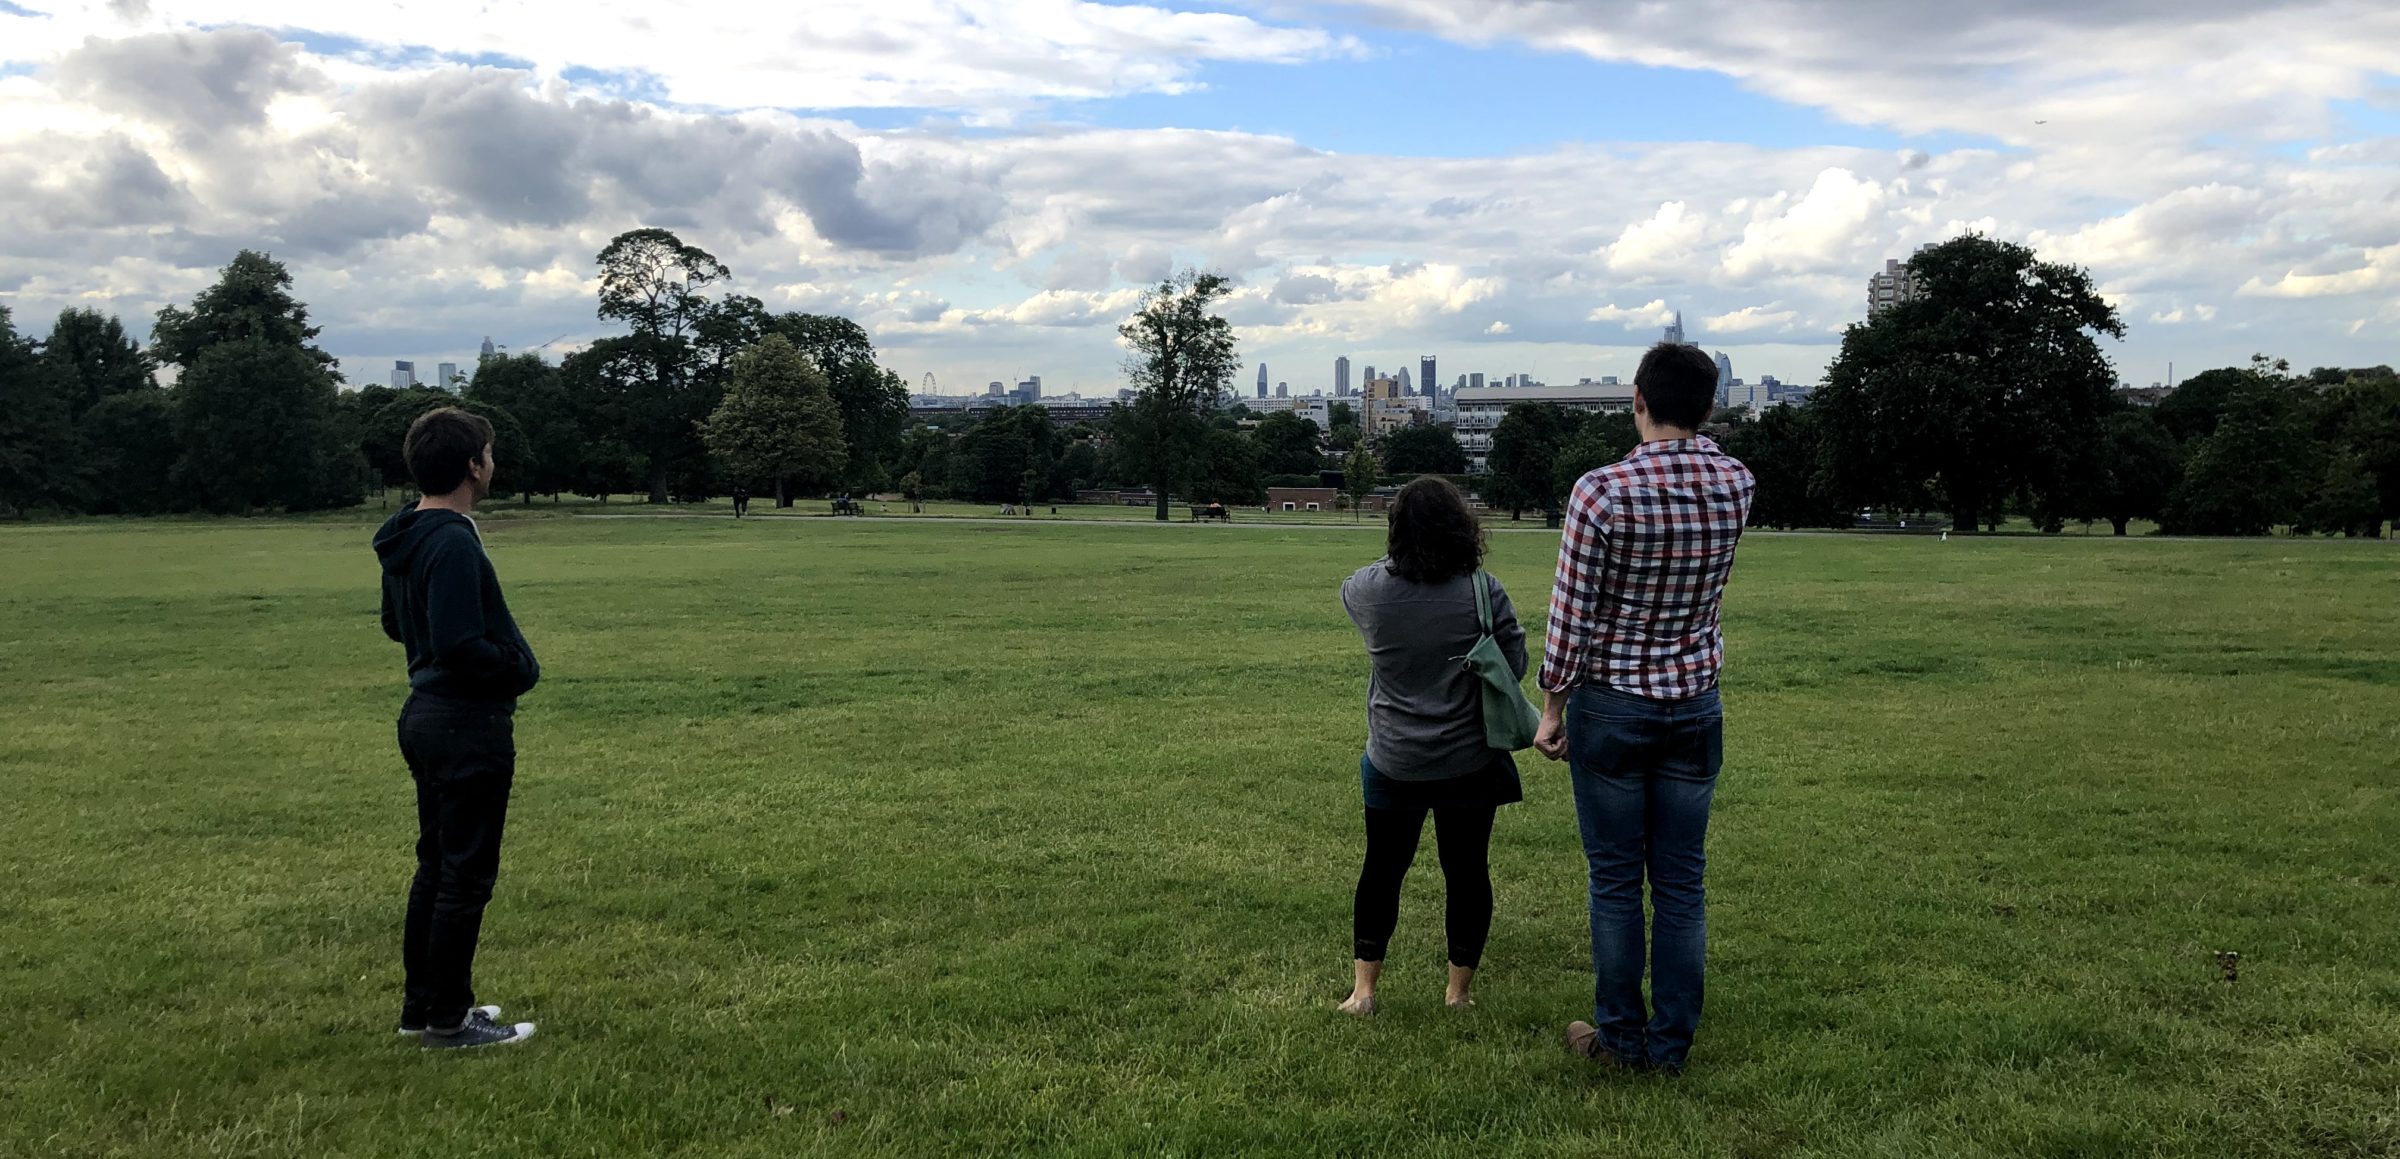 Randi finds the perfect skyline view from the park